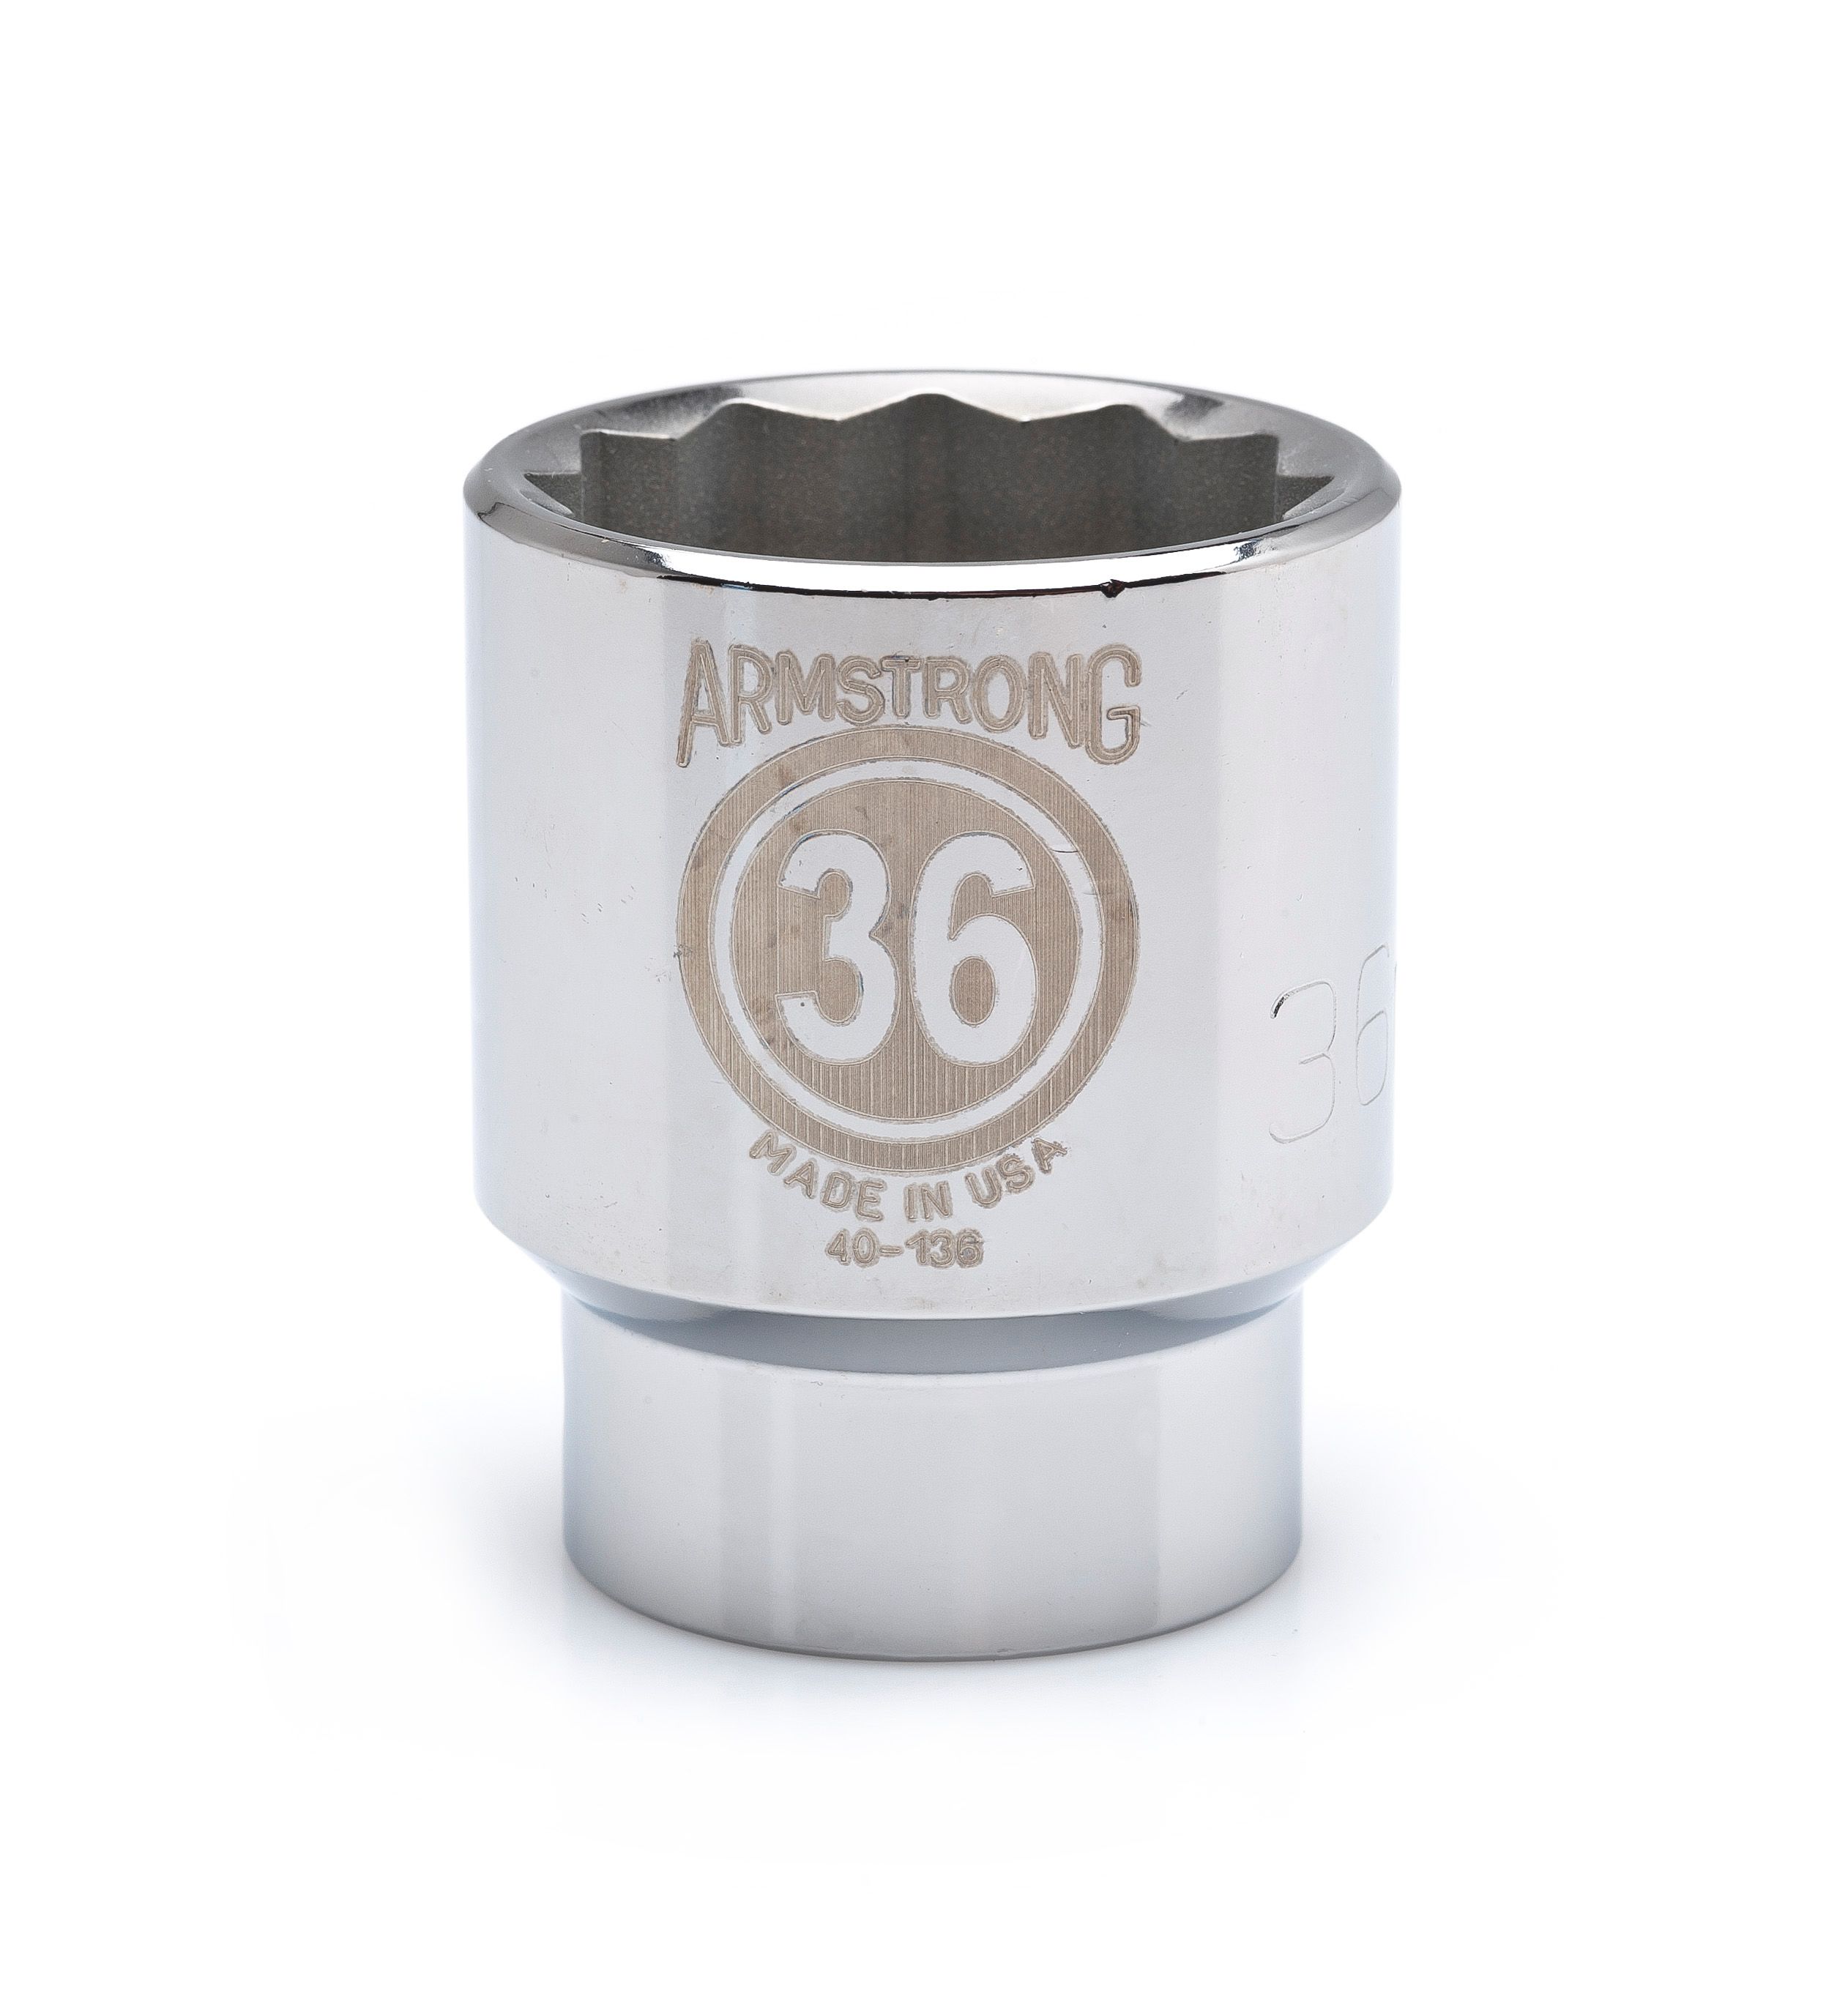 Armstrong Tools 54 mm socket, 12 pt. 3/4 in. drive